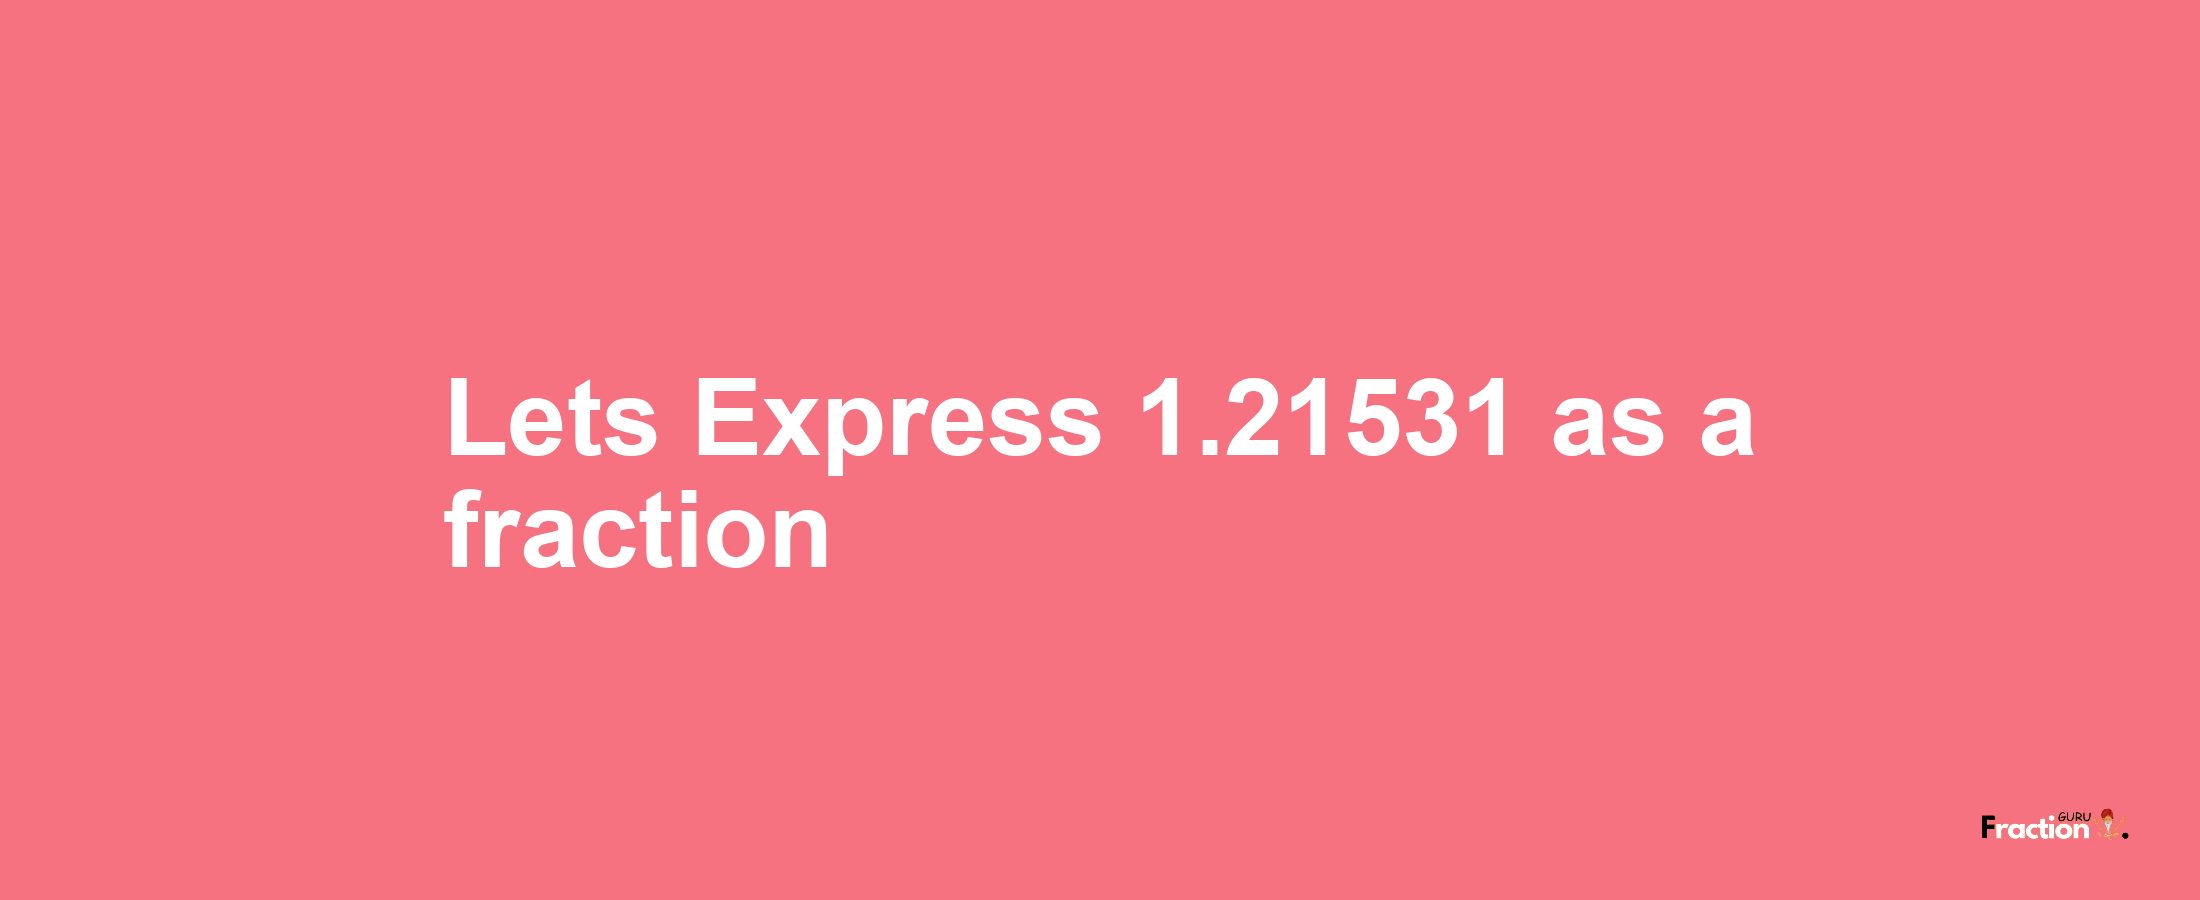 Lets Express 1.21531 as afraction